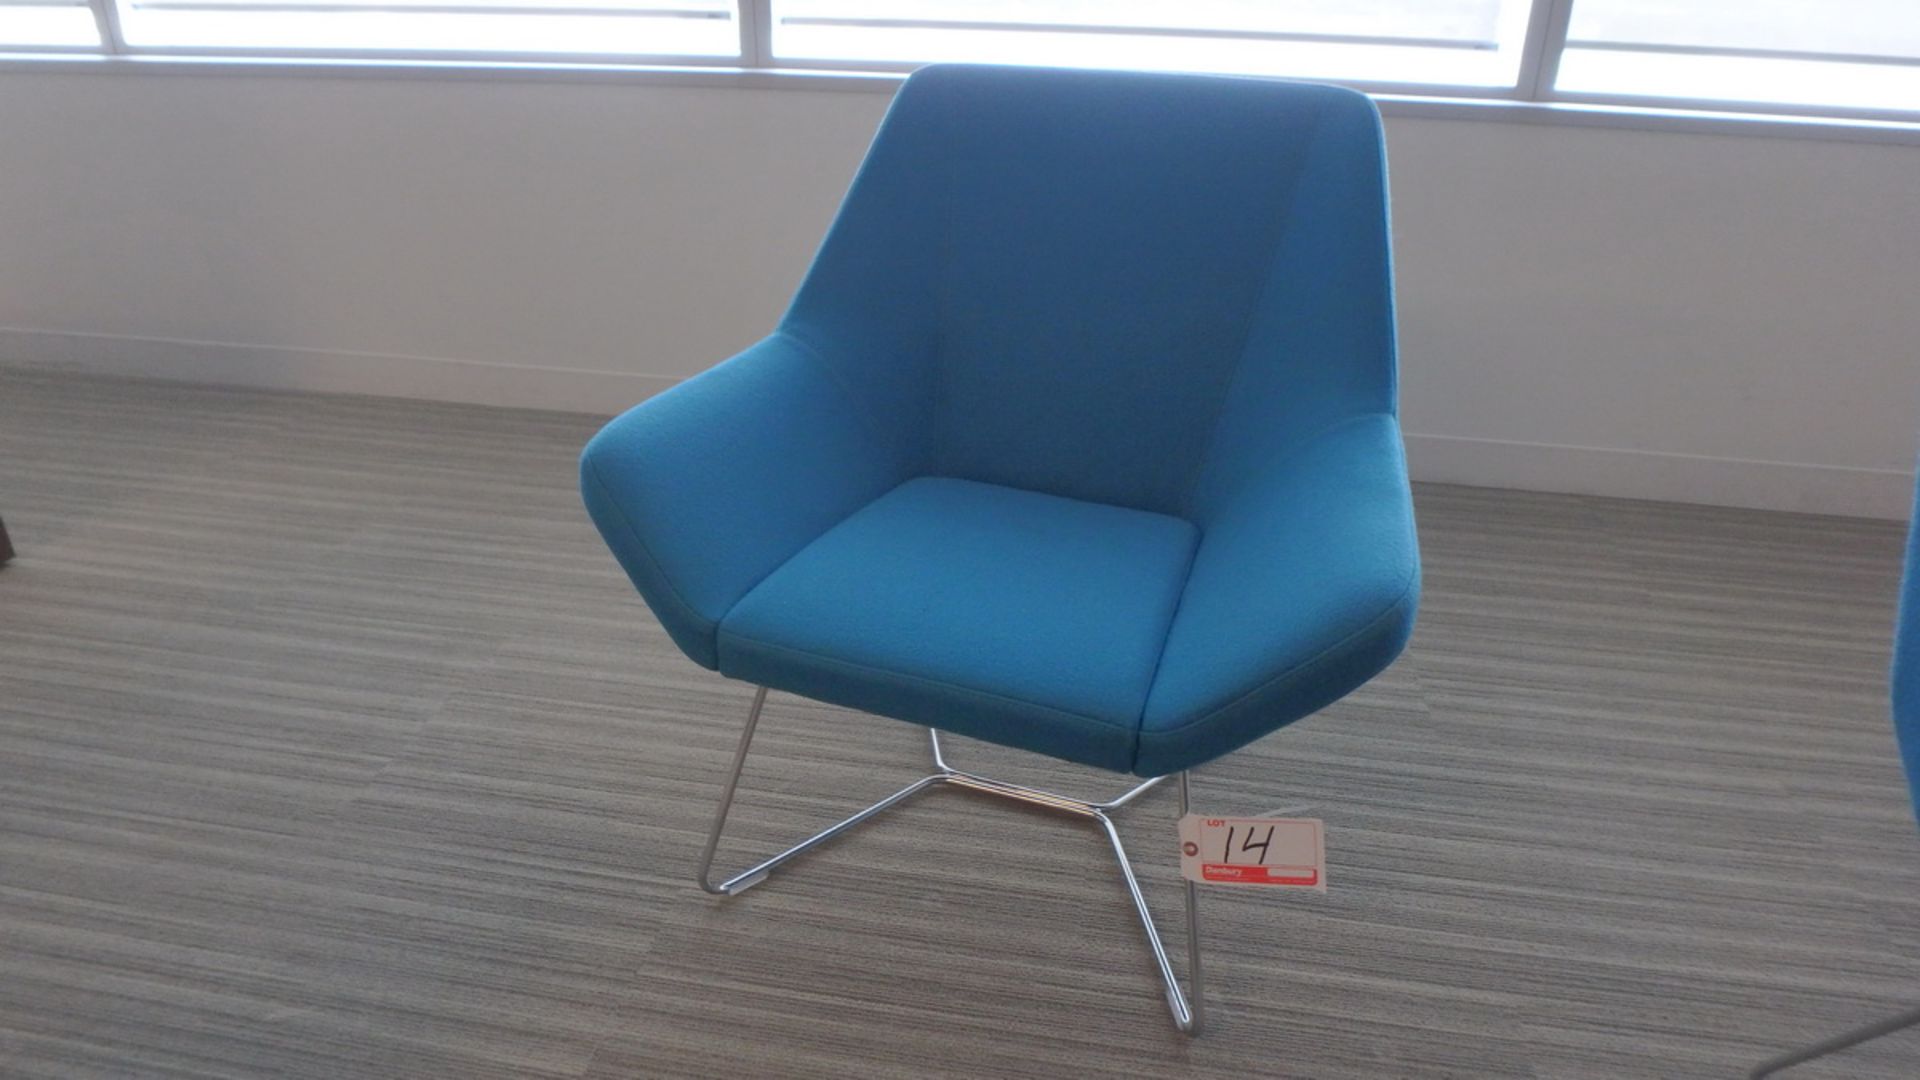 KEILHAUER CAHOOTS BLUE FABRIC LOUNGE CHAIR